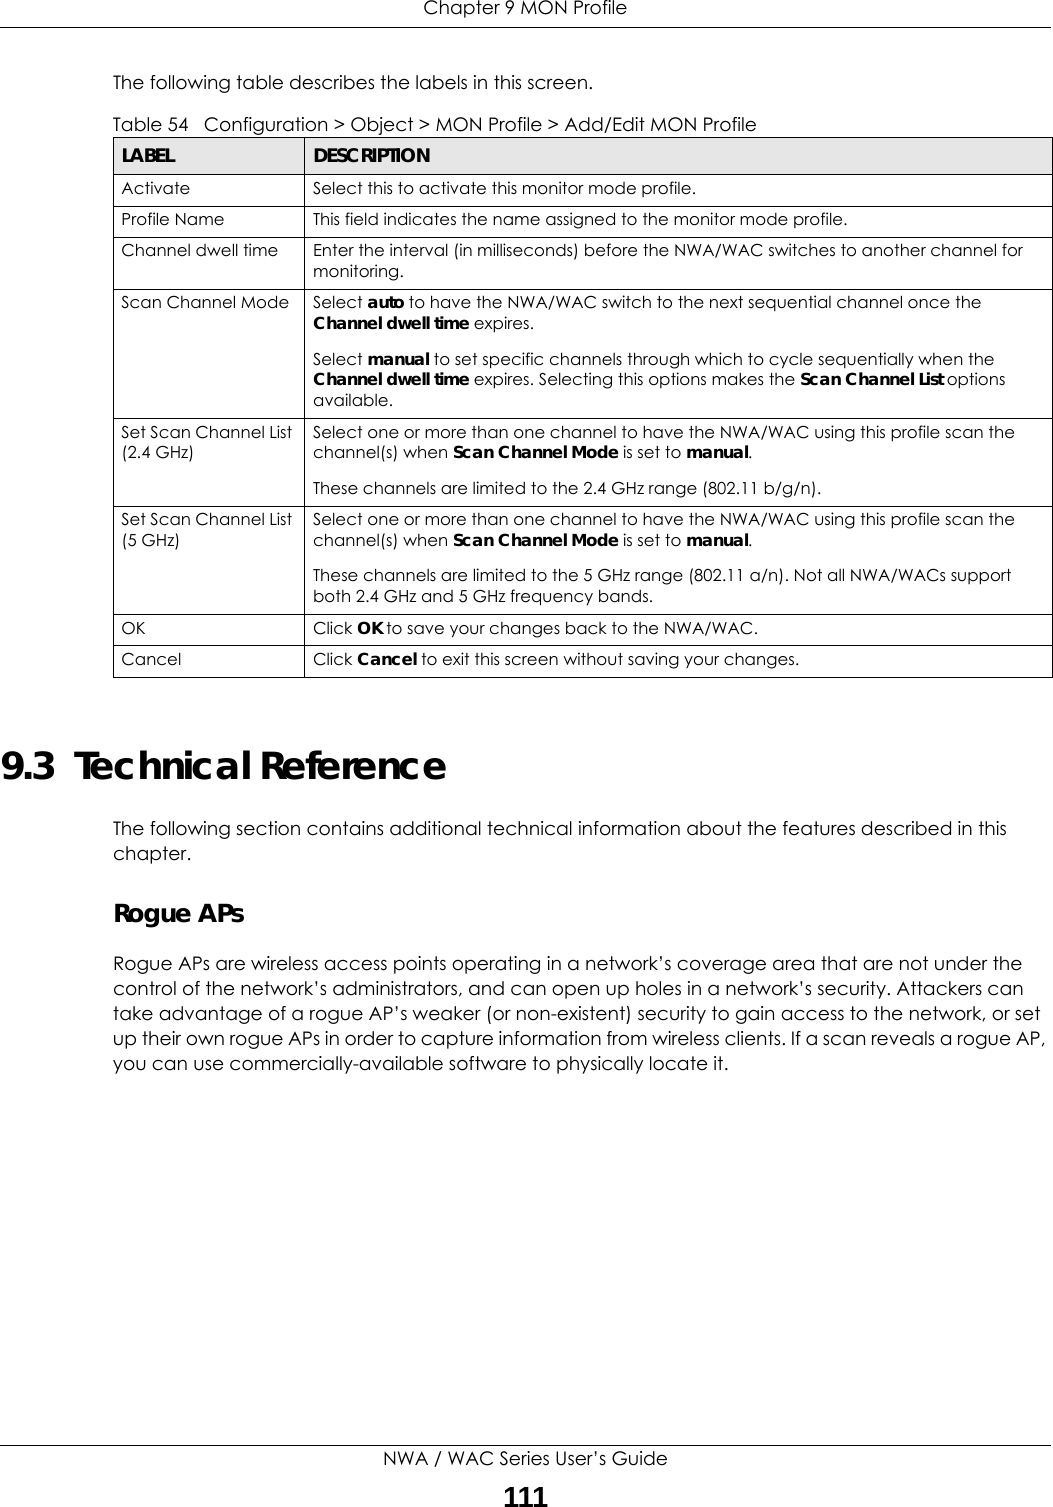 Chapter 9 MON ProfileNWA / WAC Series User’s Guide111The following table describes the labels in this screen.  9.3  Technical ReferenceThe following section contains additional technical information about the features described in this chapter.Rogue APsRogue APs are wireless access points operating in a network’s coverage area that are not under the control of the network’s administrators, and can open up holes in a network’s security. Attackers can take advantage of a rogue AP’s weaker (or non-existent) security to gain access to the network, or set up their own rogue APs in order to capture information from wireless clients. If a scan reveals a rogue AP, you can use commercially-available software to physically locate it.Table 54   Configuration &gt; Object &gt; MON Profile &gt; Add/Edit MON ProfileLABEL DESCRIPTIONActivate Select this to activate this monitor mode profile.Profile Name This field indicates the name assigned to the monitor mode profile.Channel dwell time Enter the interval (in milliseconds) before the NWA/WAC switches to another channel for monitoring.Scan Channel Mode Select auto to have the NWA/WAC switch to the next sequential channel once the Channel dwell time expires.Select manual to set specific channels through which to cycle sequentially when the Channel dwell time expires. Selecting this options makes the Scan Channel List options available.Set Scan Channel List (2.4 GHz)Select one or more than one channel to have the NWA/WAC using this profile scan the channel(s) when Scan Channel Mode is set to manual.These channels are limited to the 2.4 GHz range (802.11 b/g/n).Set Scan Channel List (5 GHz)Select one or more than one channel to have the NWA/WAC using this profile scan the channel(s) when Scan Channel Mode is set to manual.These channels are limited to the 5 GHz range (802.11 a/n). Not all NWA/WACs support both 2.4 GHz and 5 GHz frequency bands.OK Click OK to save your changes back to the NWA/WAC.Cancel Click Cancel to exit this screen without saving your changes.